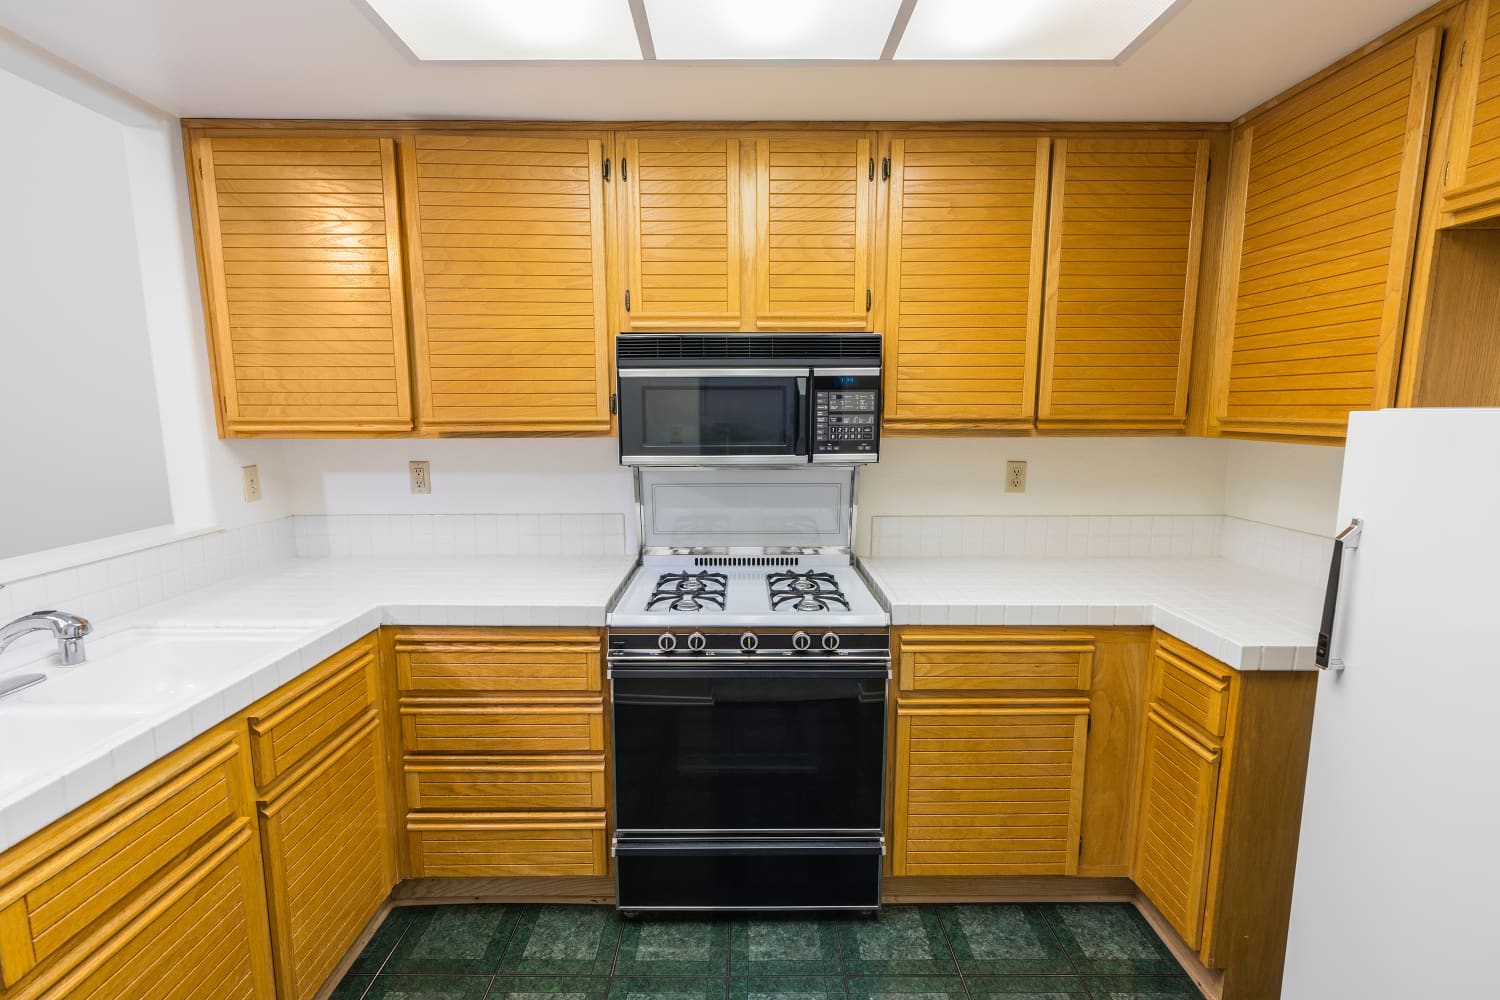 I Transformed My Dated Kitchen Cabinets with Faux Wood Grain